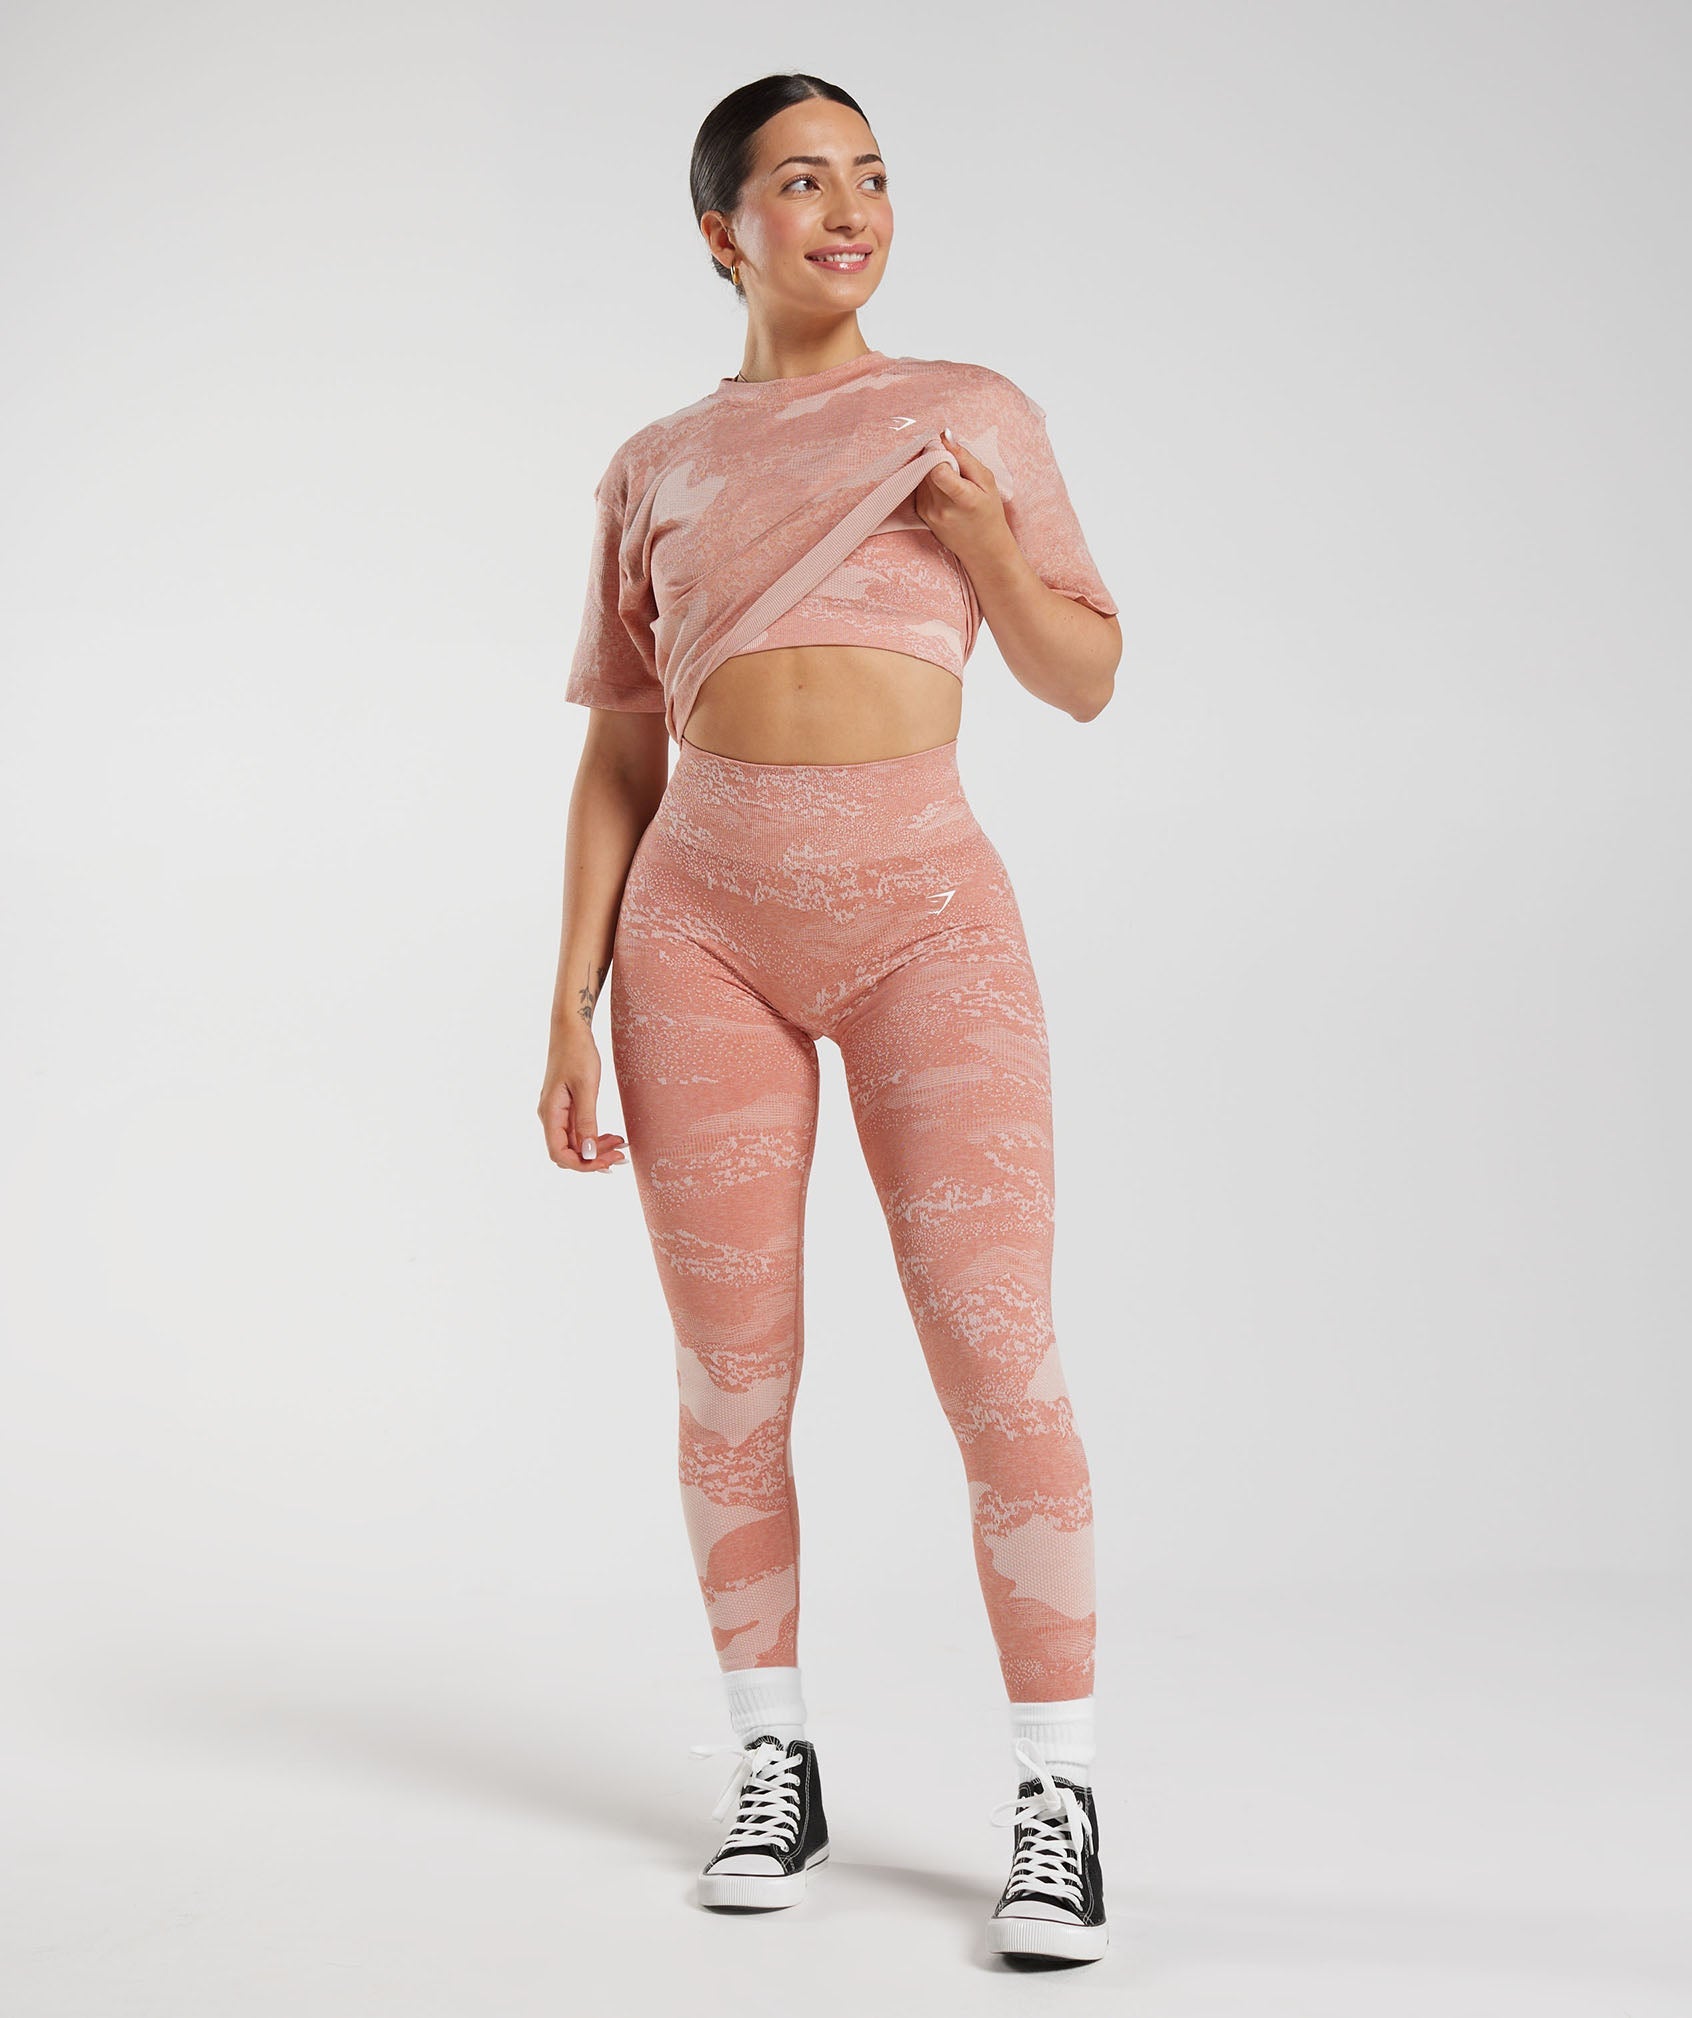 Adapt Camo Seamless Crop Top in Misty Pink/Hazy Pink - view 4